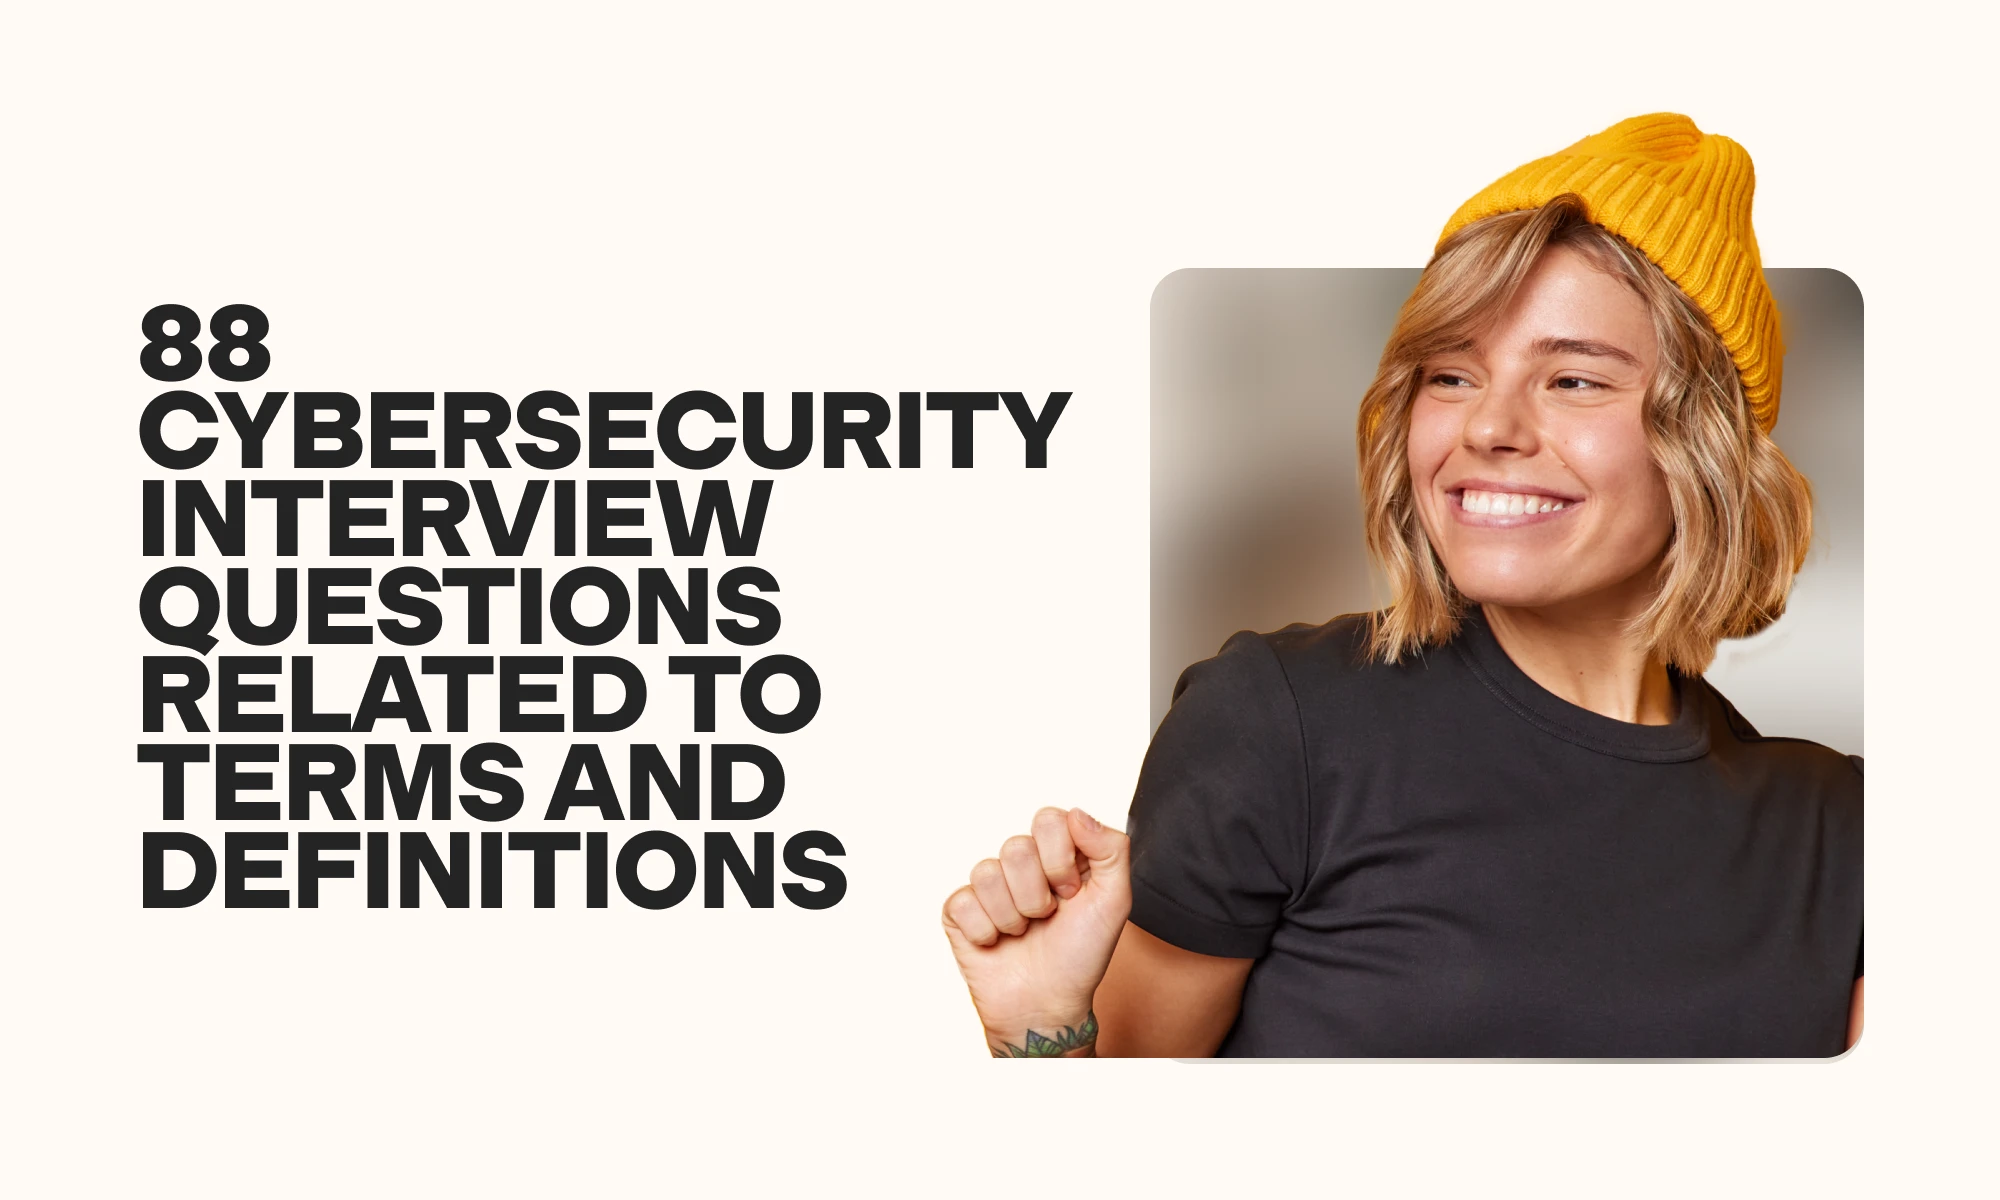 88 cybersecurity interview questions